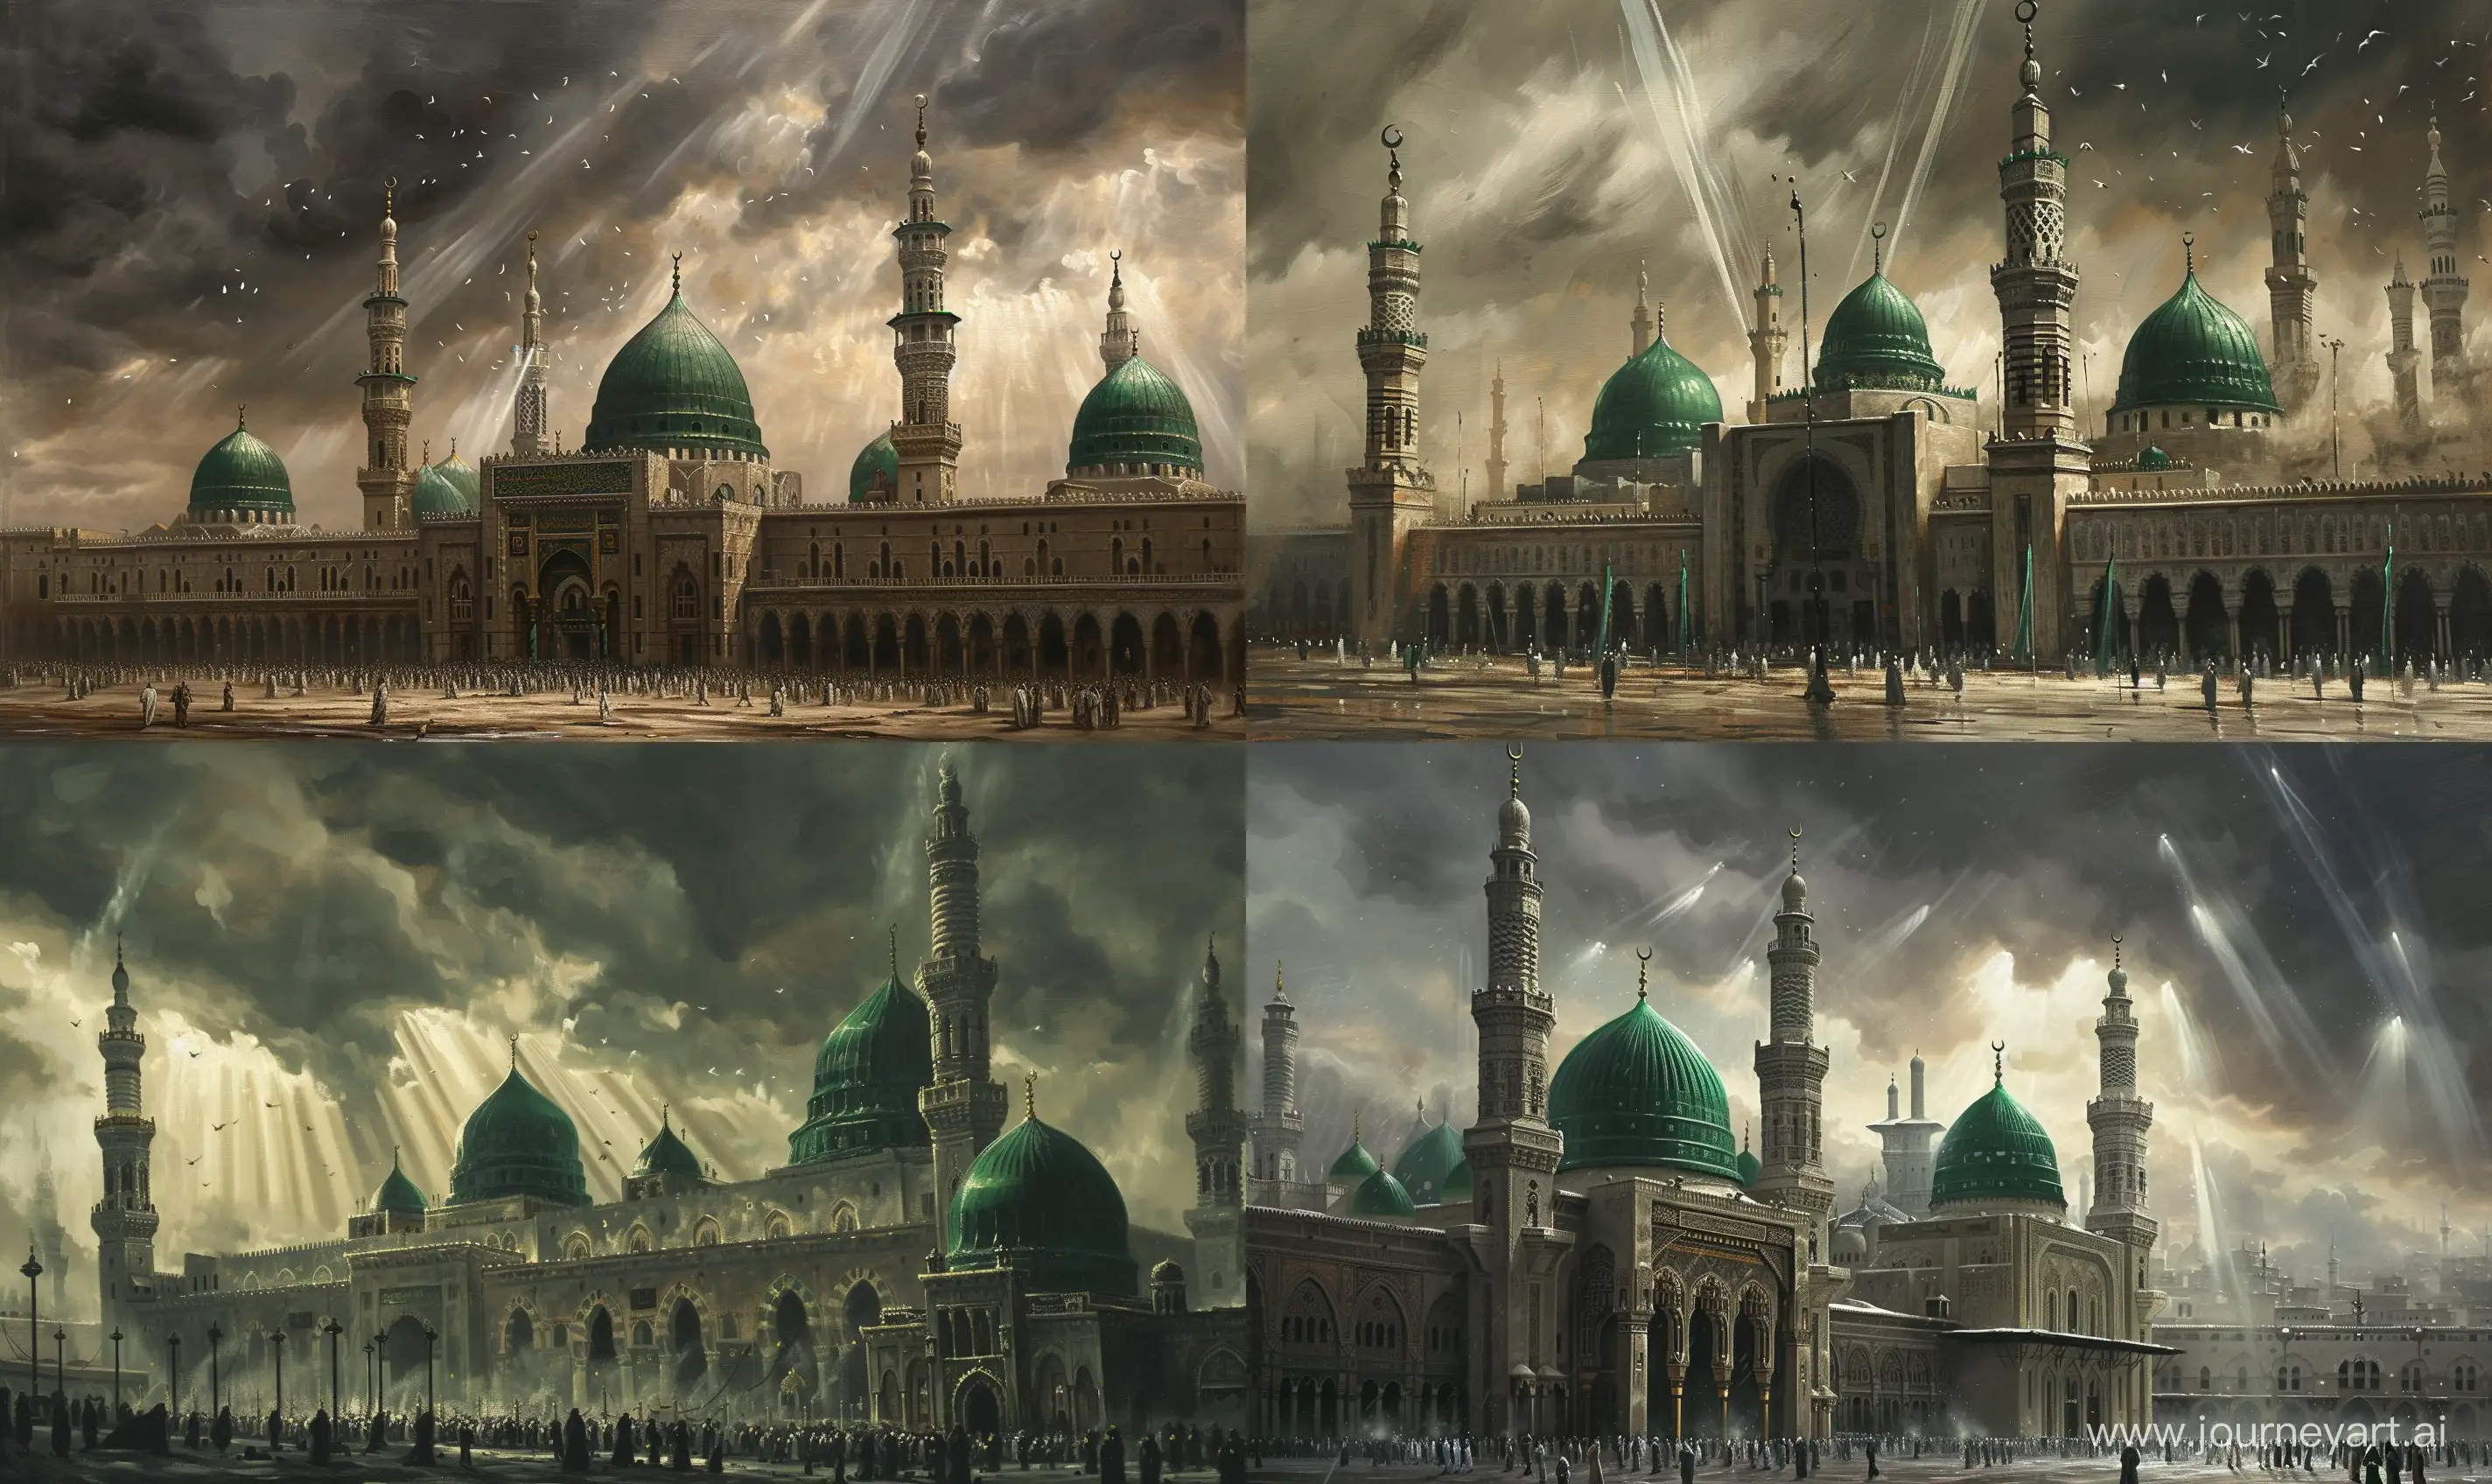 Medieval-Renaissance-Painting-of-the-Grand-Mosque-in-Medina-under-a-Cloudy-Sky